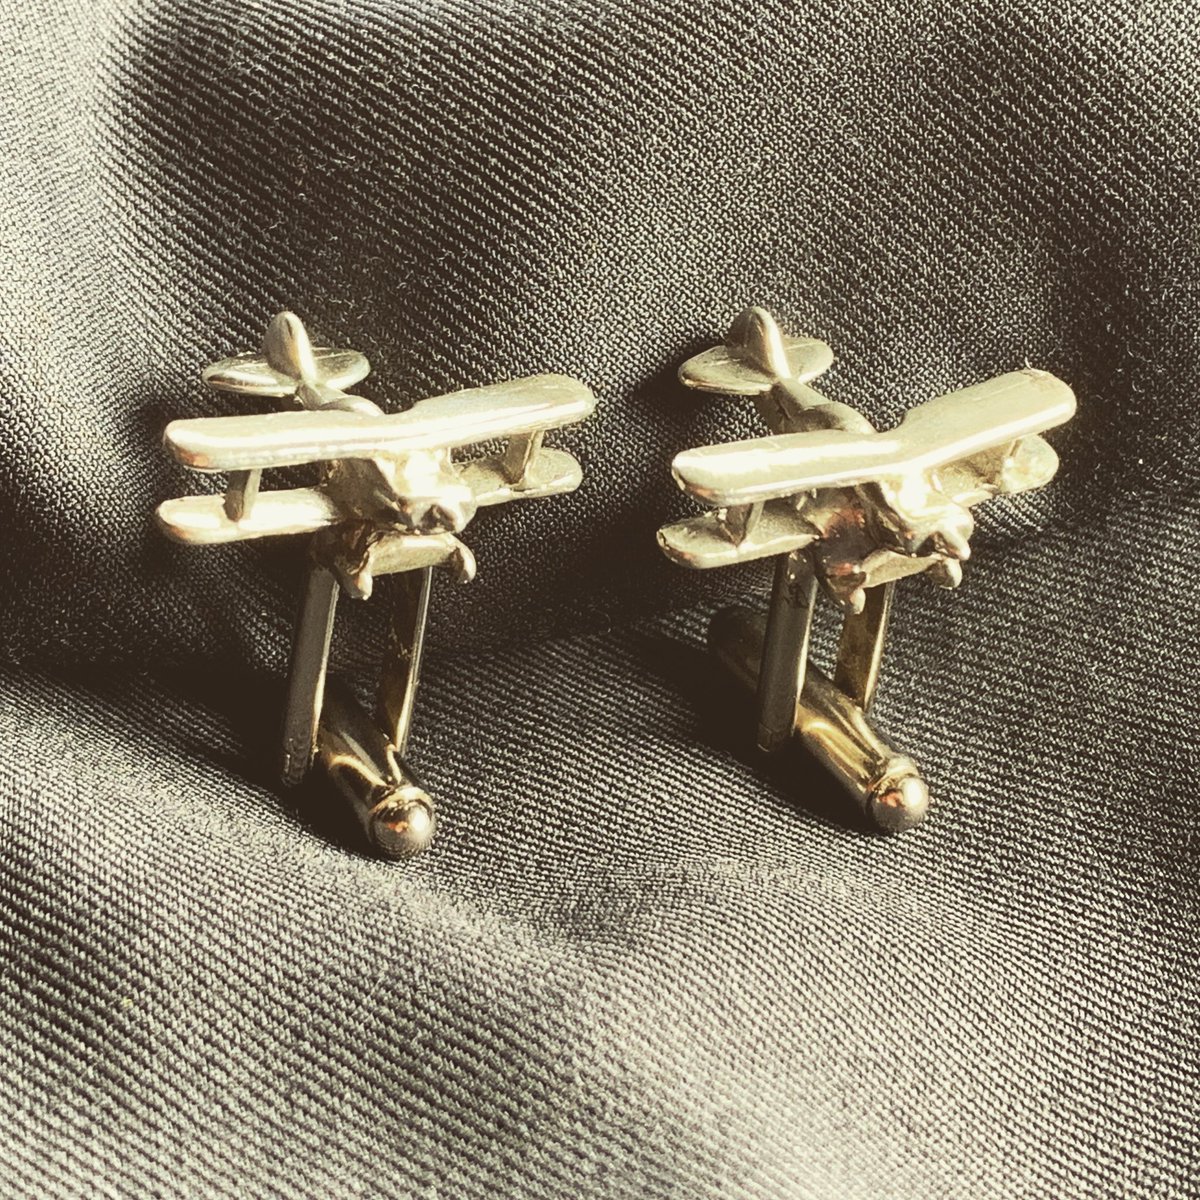 Slightly smaller pair of Pitts Specials than we’re used to today... #pittsspecial #avgeek #wedding #cufflinks #aerobatics #biplane